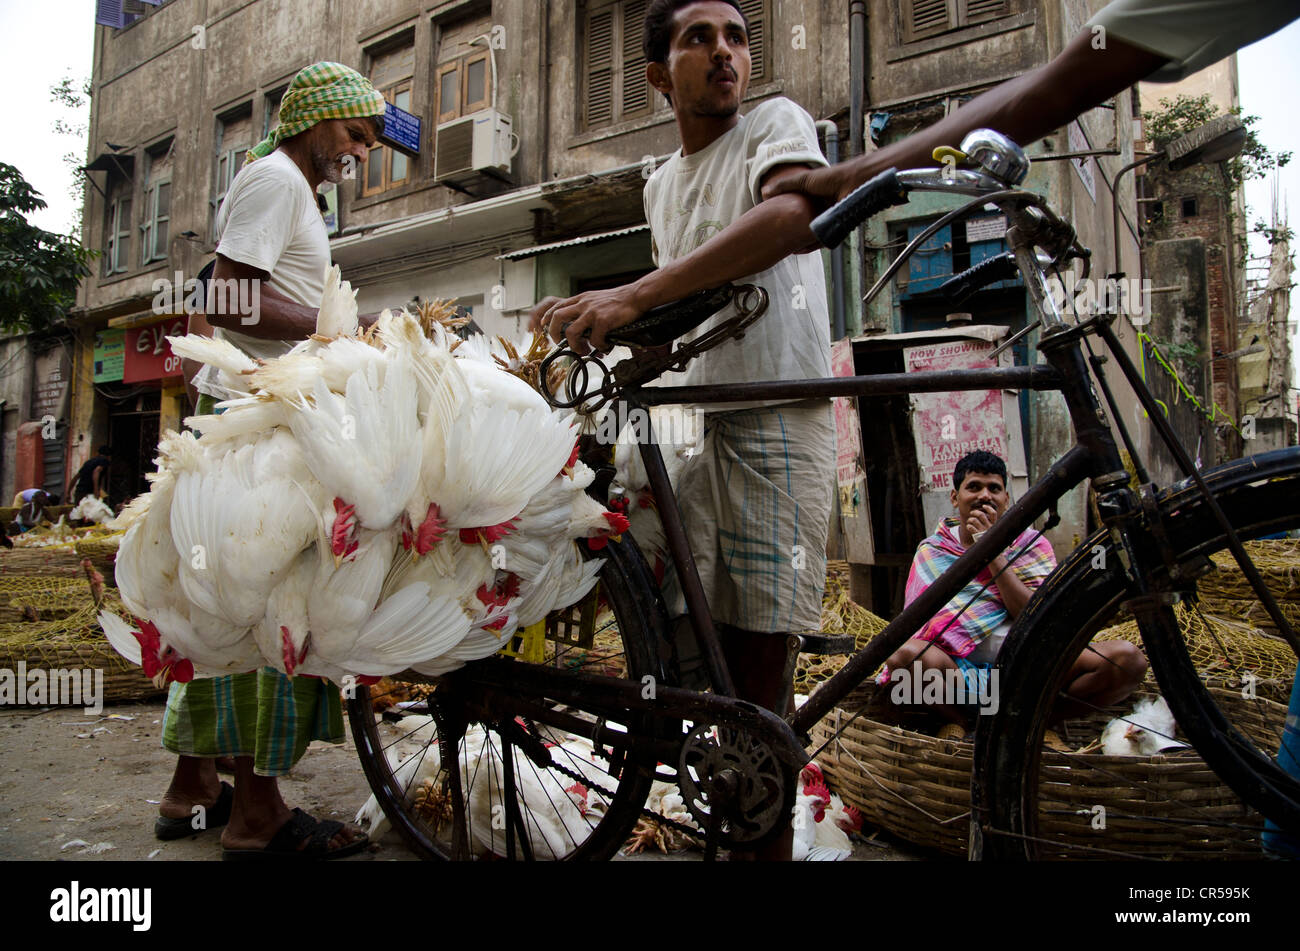 Live chicken being transported on a bicycle, Kolkata, West Bengal, India, Asia Stock Photo